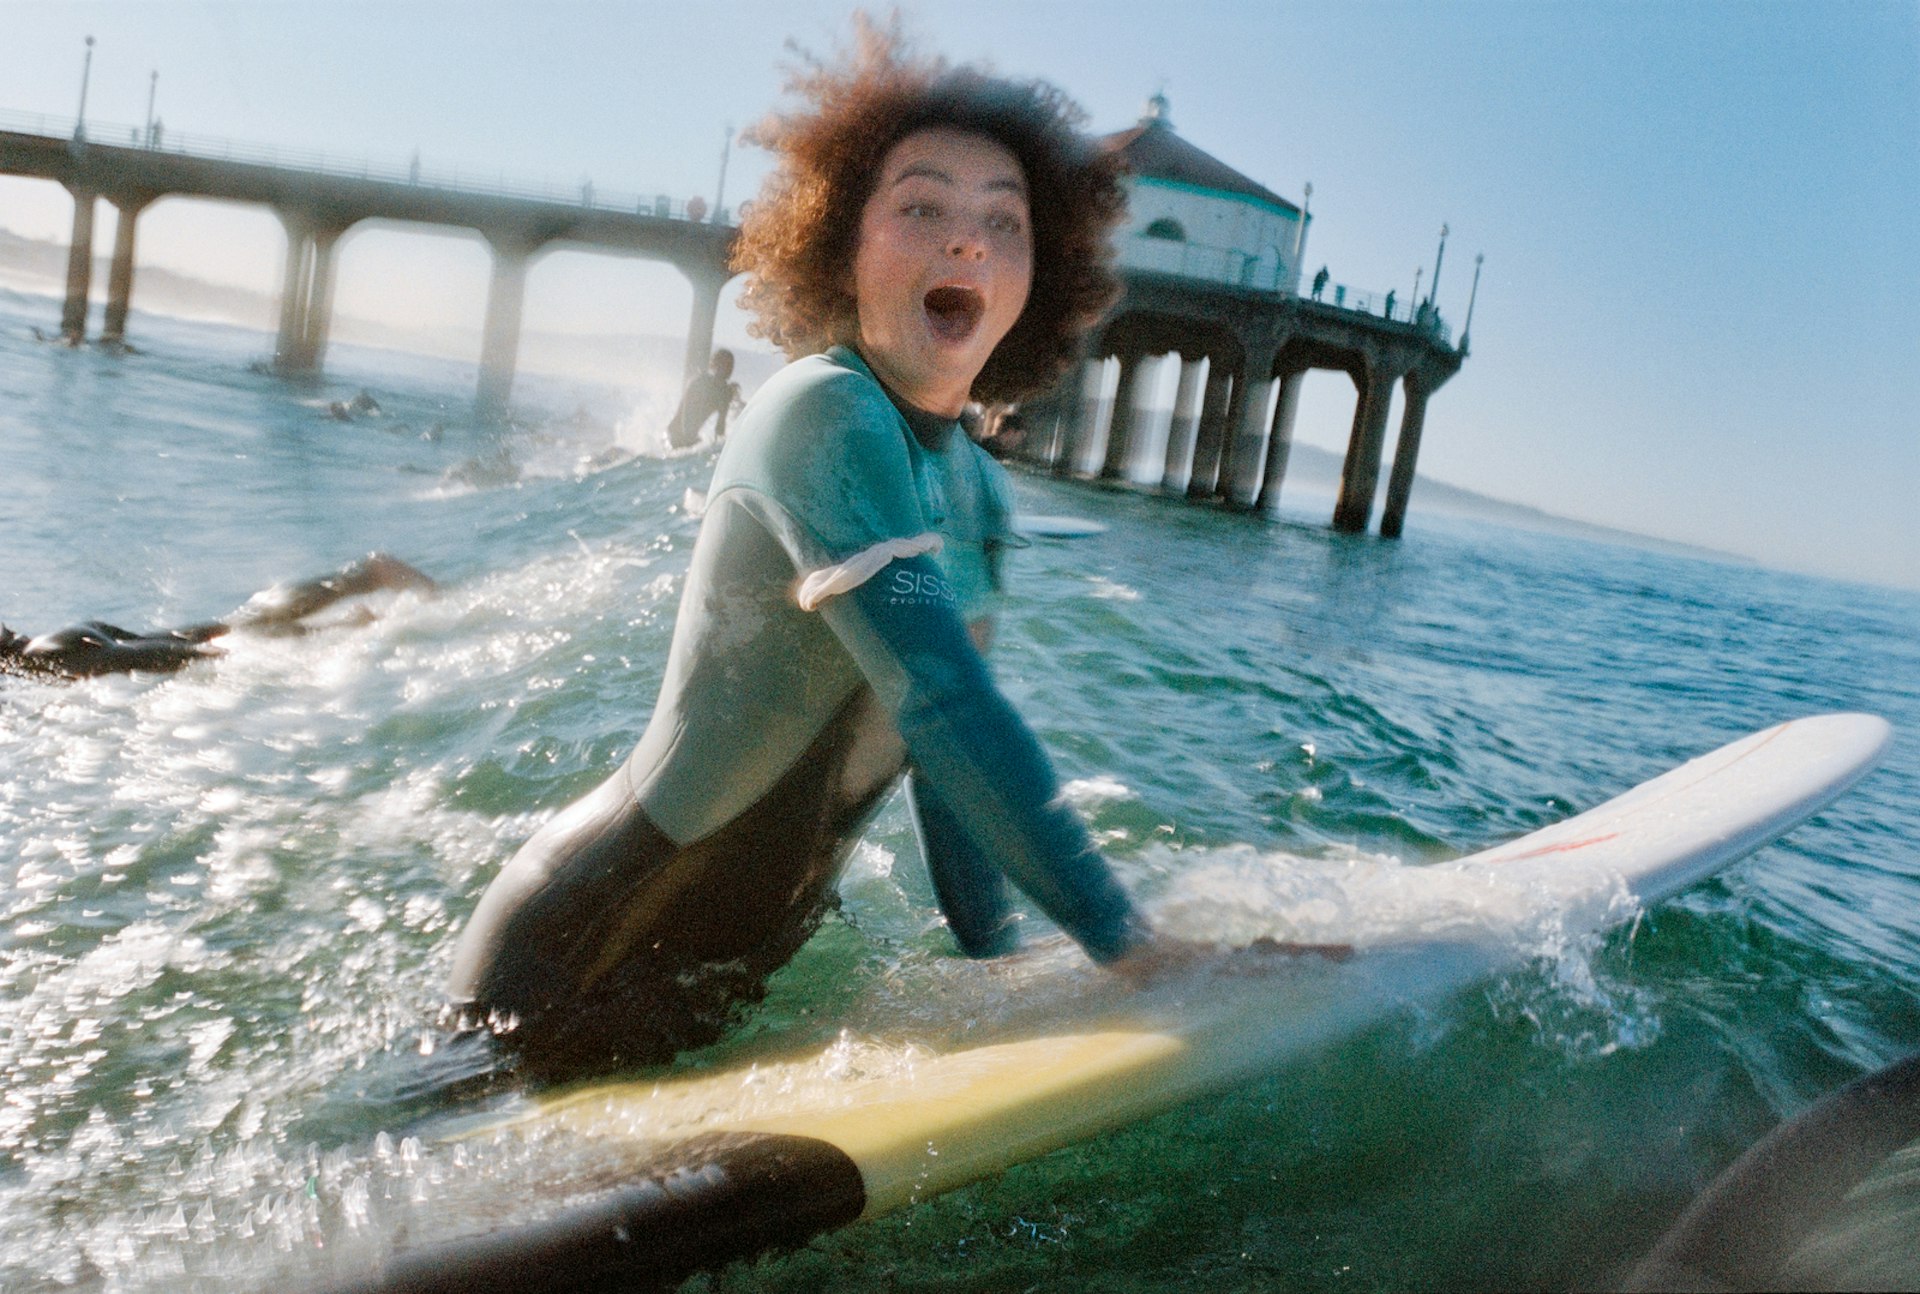 Photos capturing joy and community of Black female and non-binary American surfers